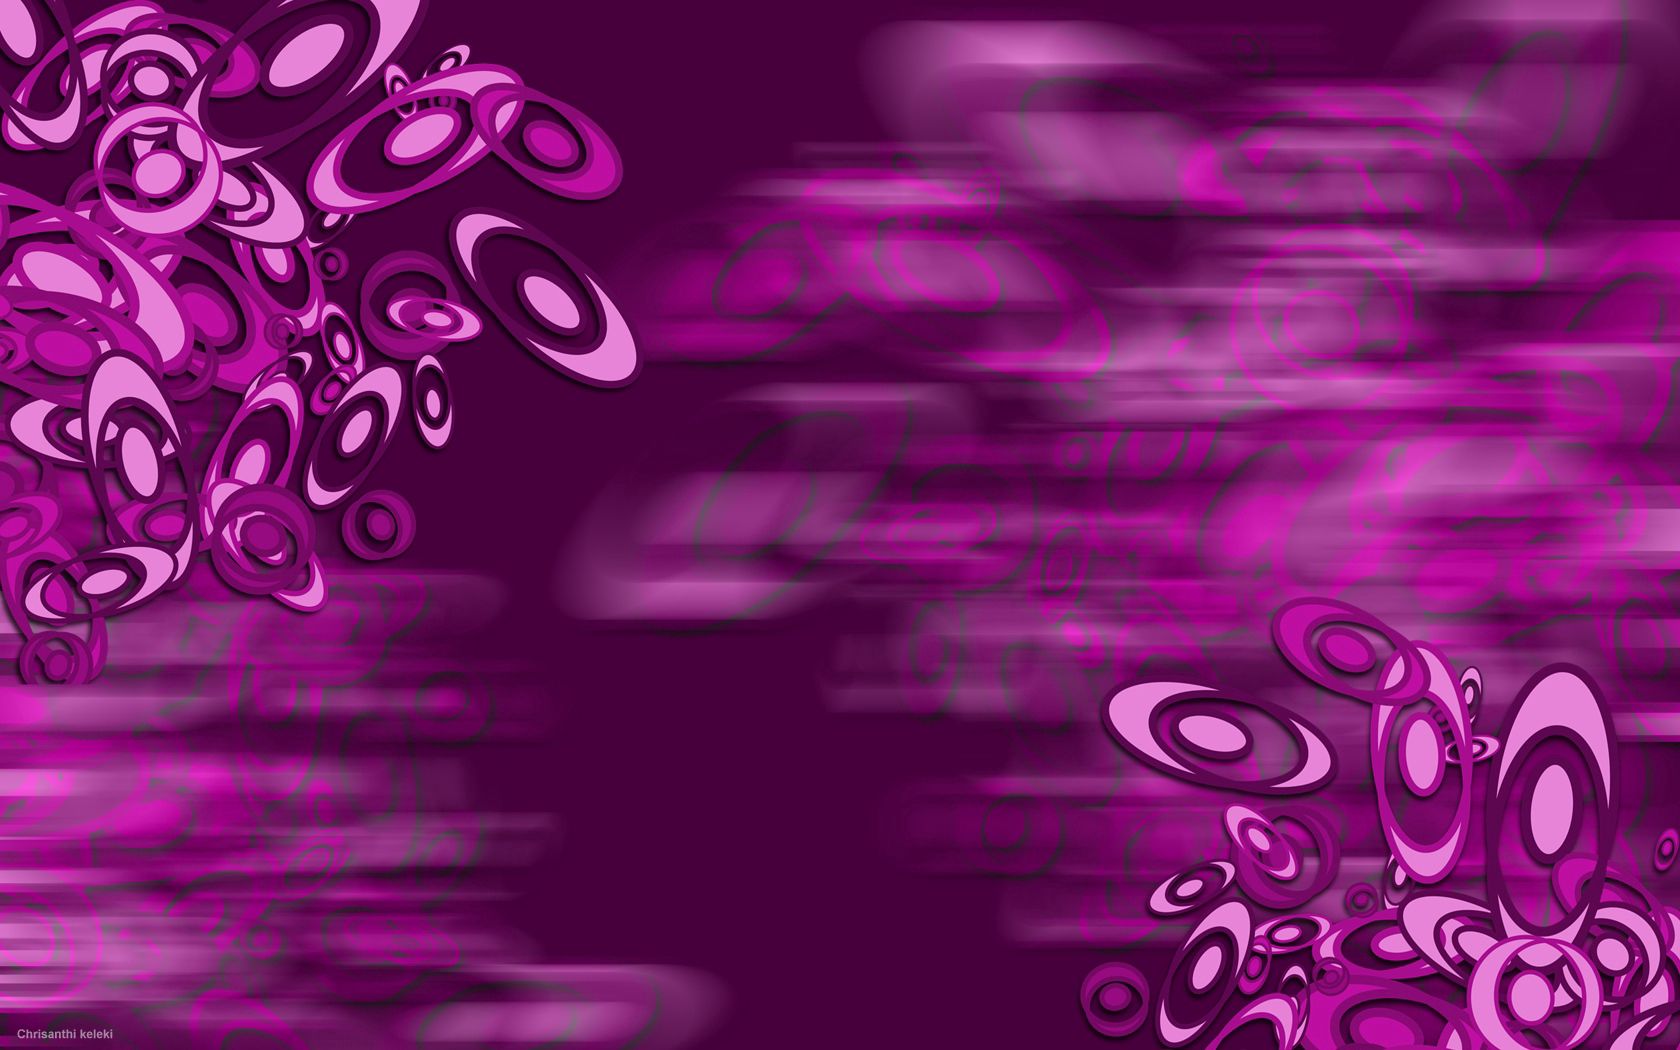 Full HD pattern, abstract, lilac, violet, picture, drawing, purple